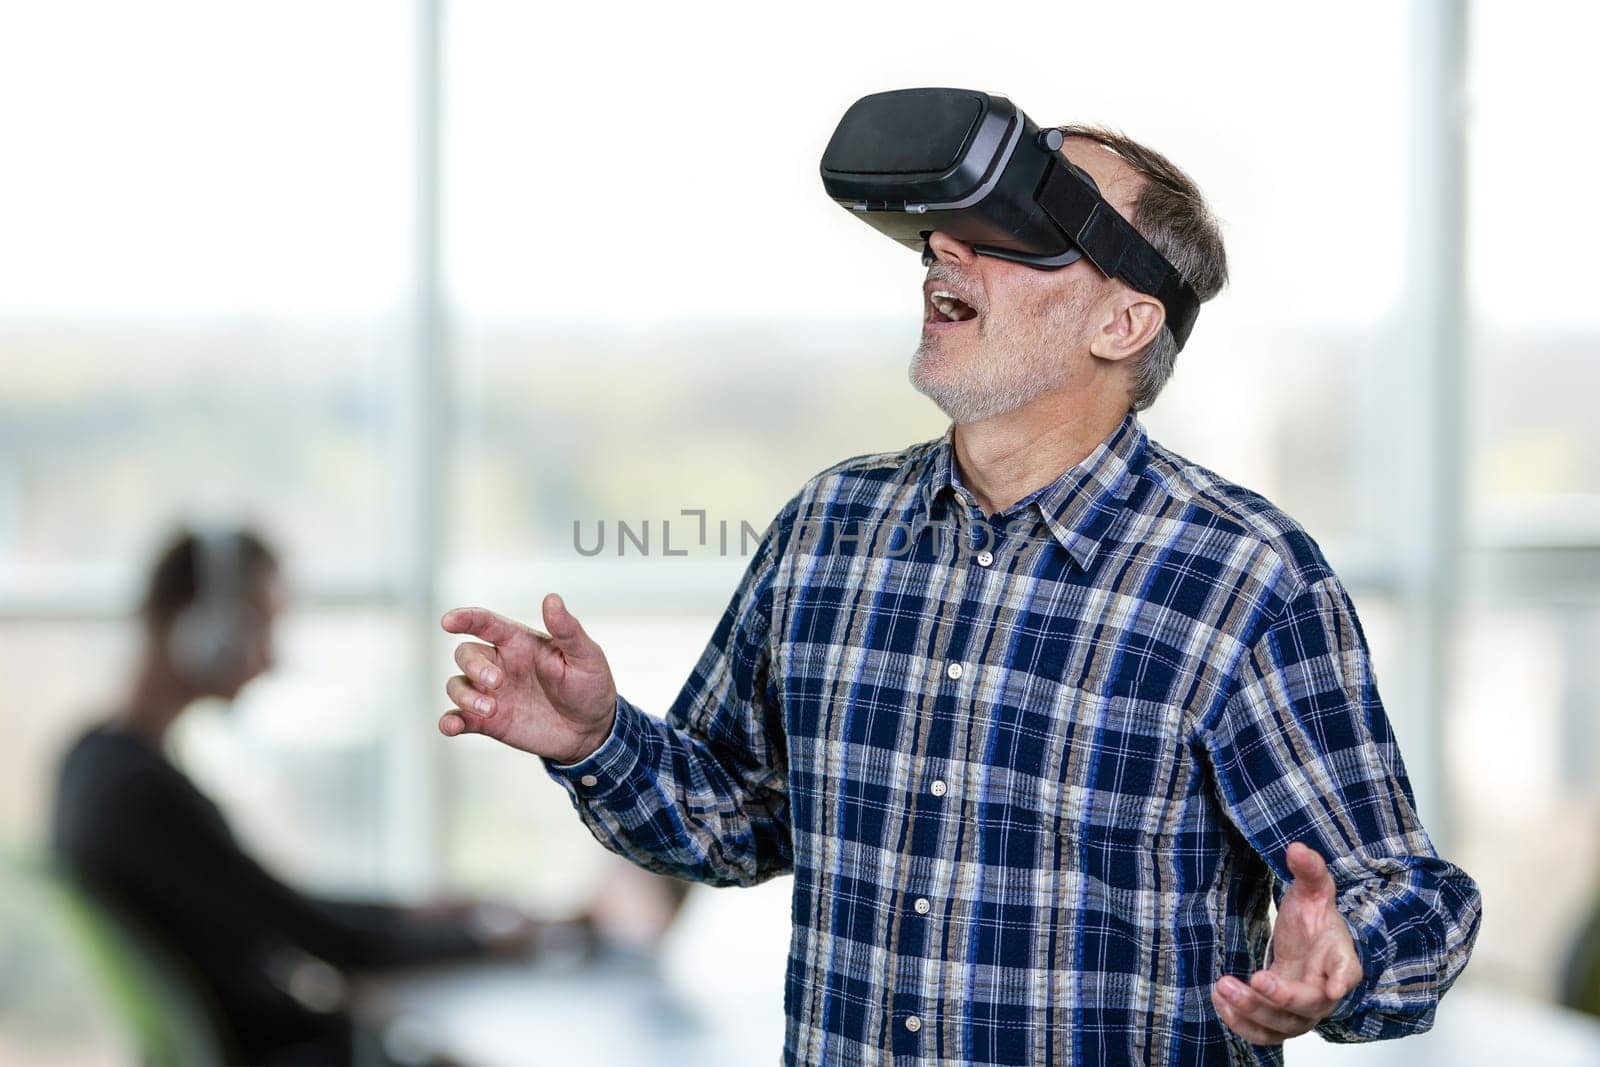 Excited elder man wearing vr headset with his mouth open. Indoor office enviroment background.